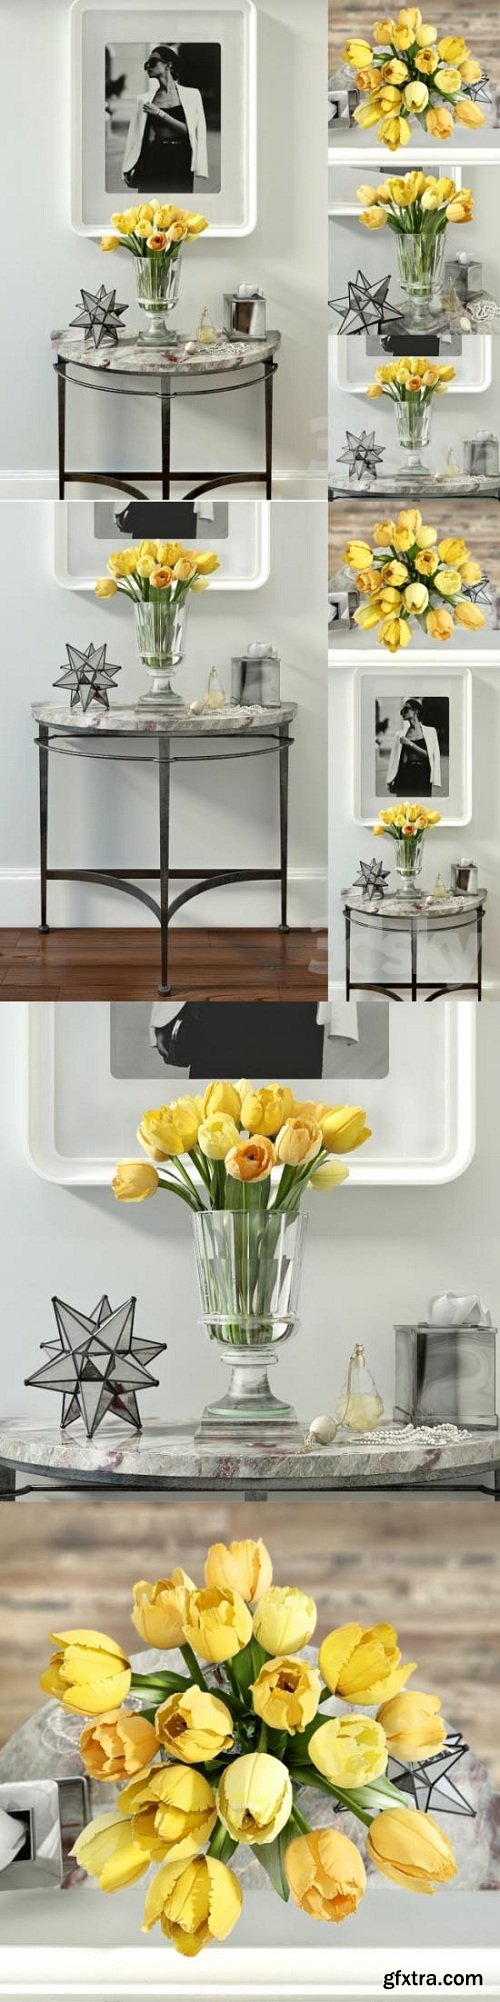 Decorative set with yellow tulips